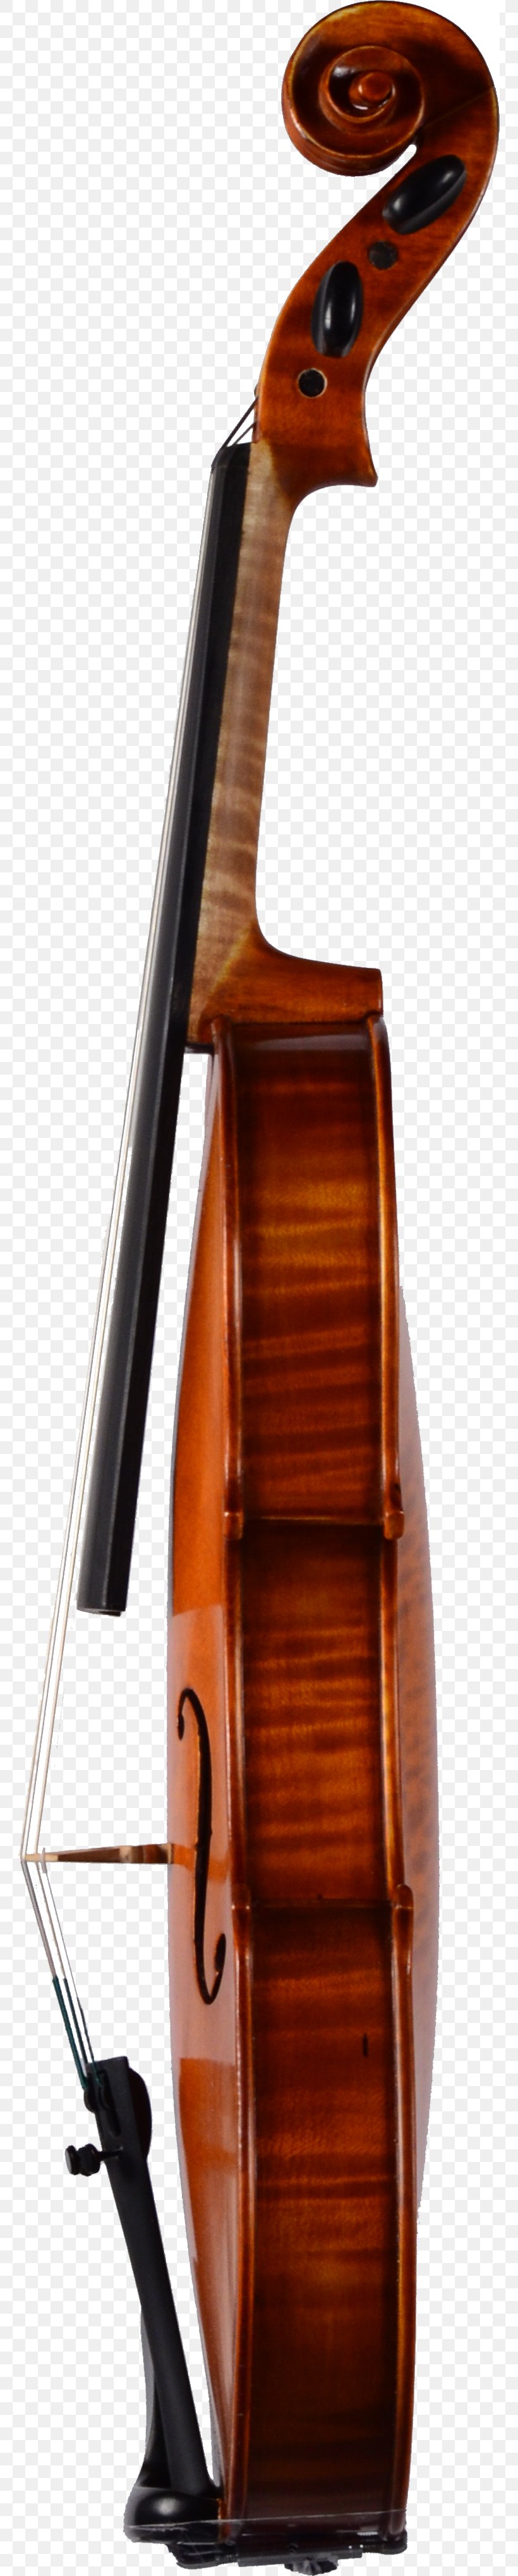 Violin Double Bass String Instruments Musical Instruments Cello, PNG, 762x4075px, Violin, Bass Violin, Bow, Bowed String Instrument, Cello Download Free